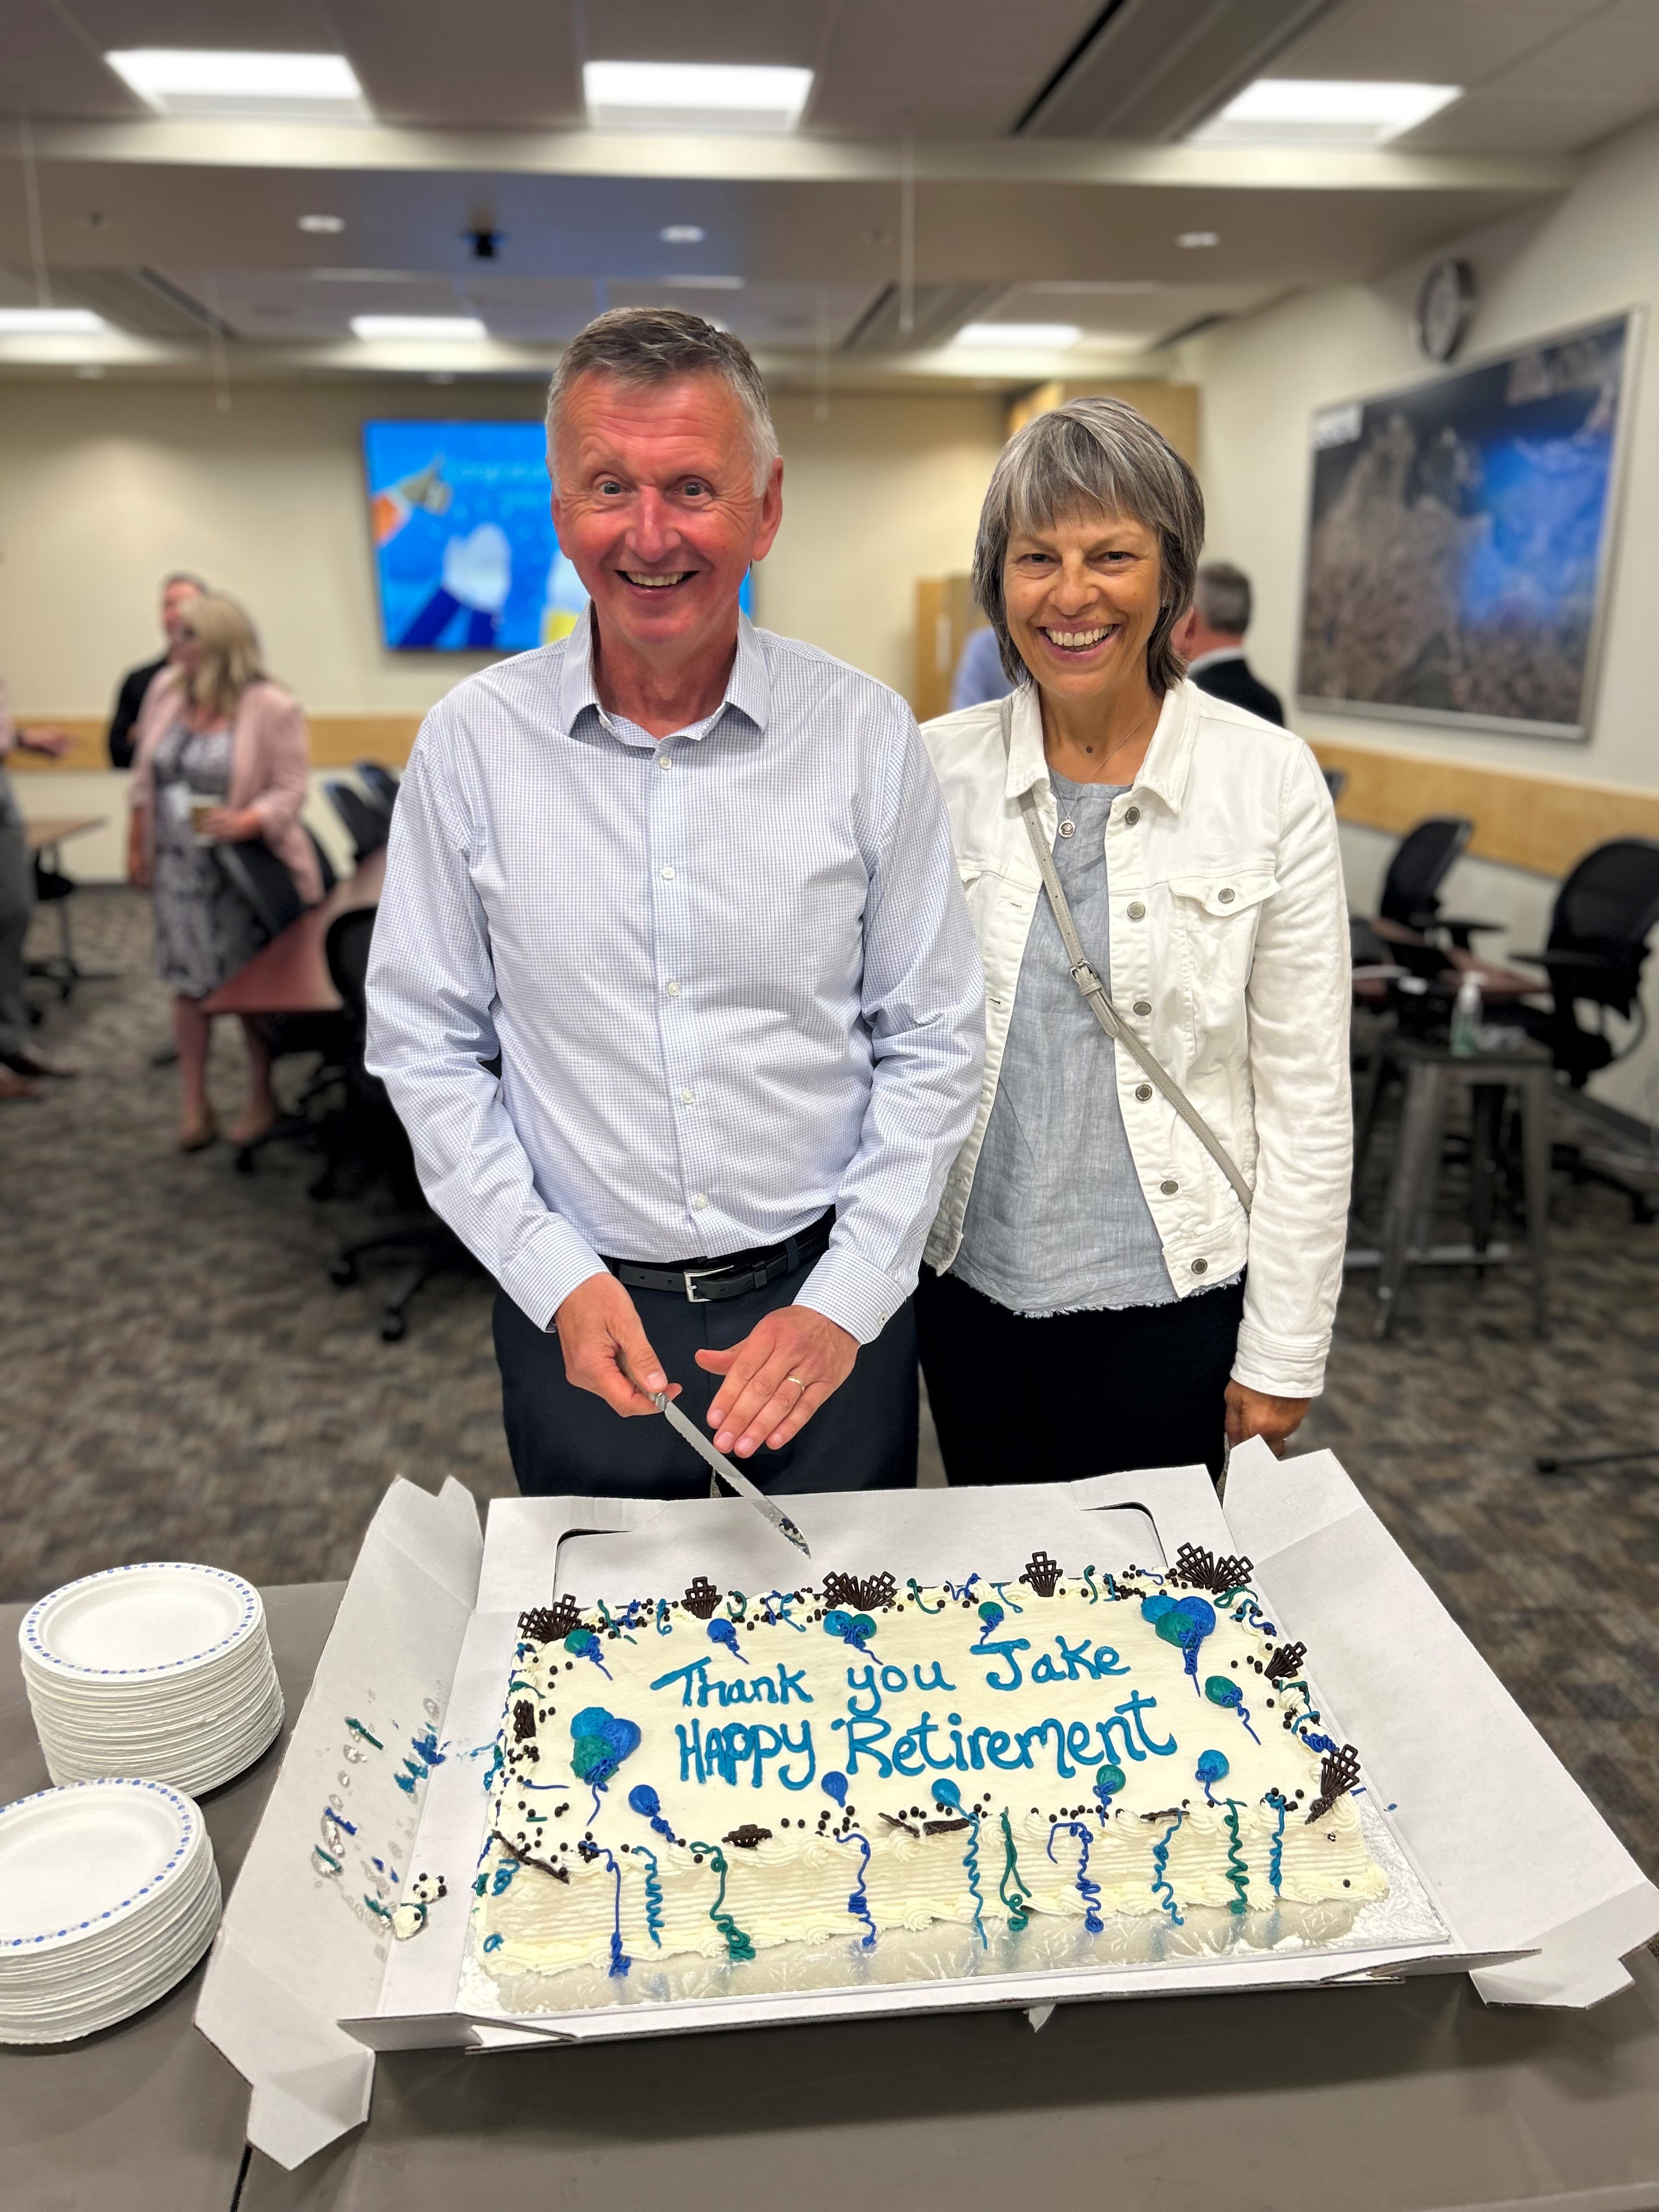 Jake and Mona Rudolph pictured cutting a retirement cake